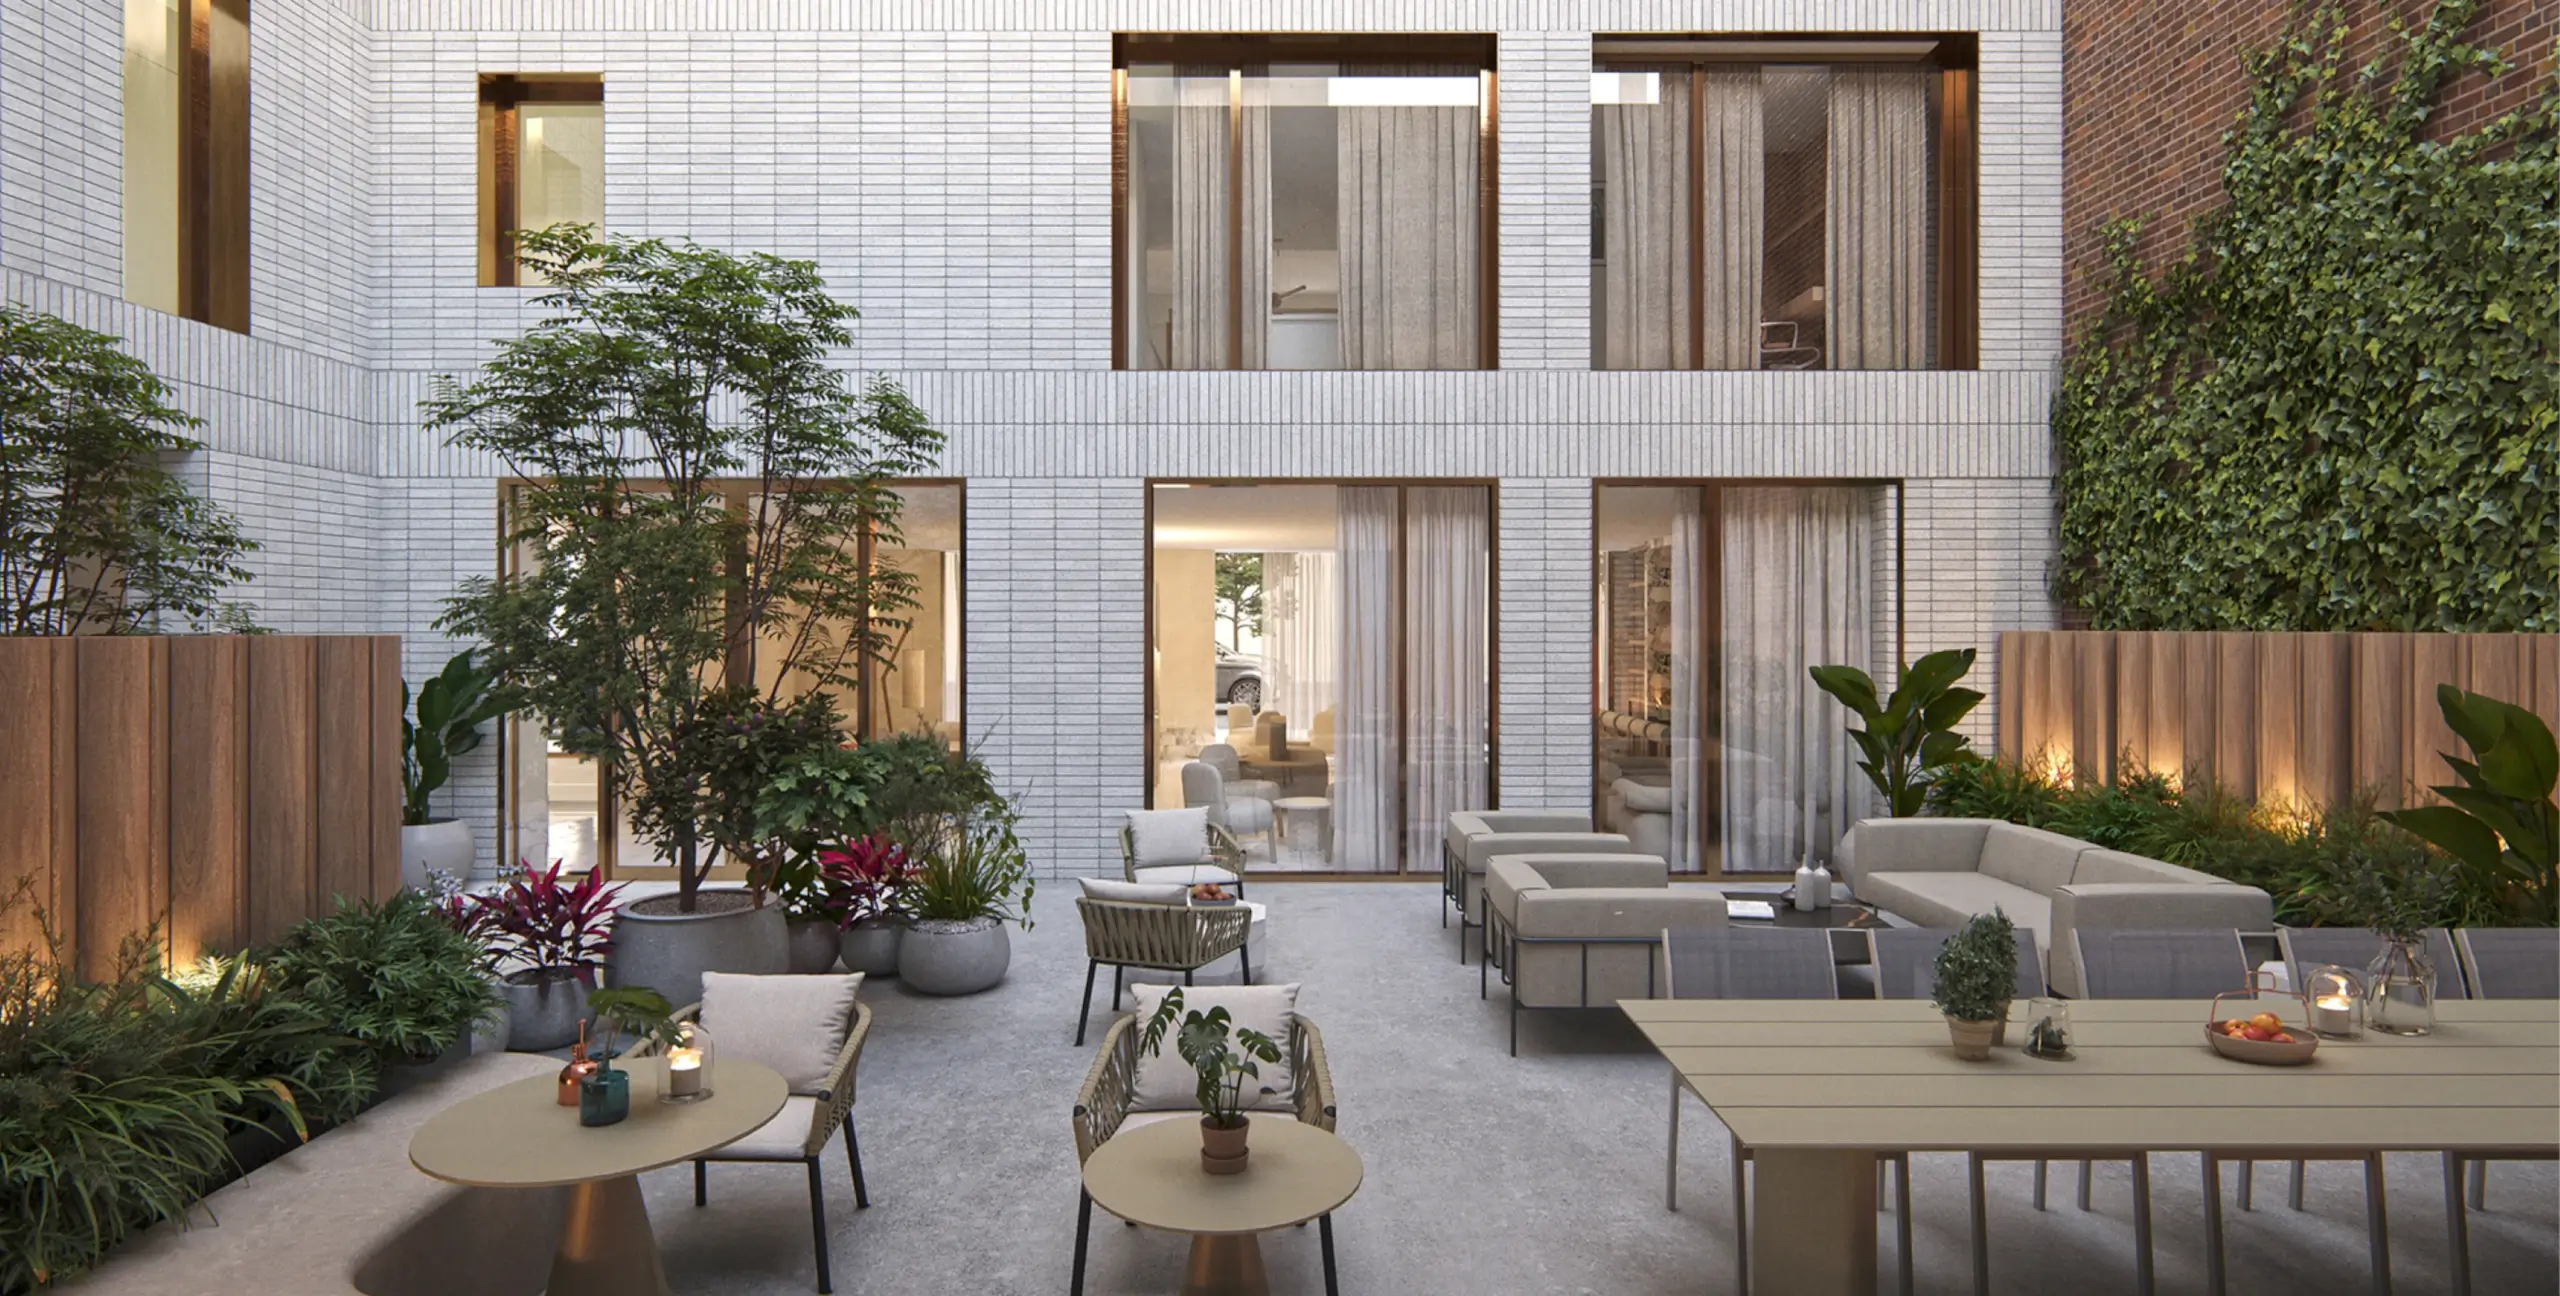 Outdoor landscaped courtyard at Hendrix House Kips Bay condominiums in NYC.